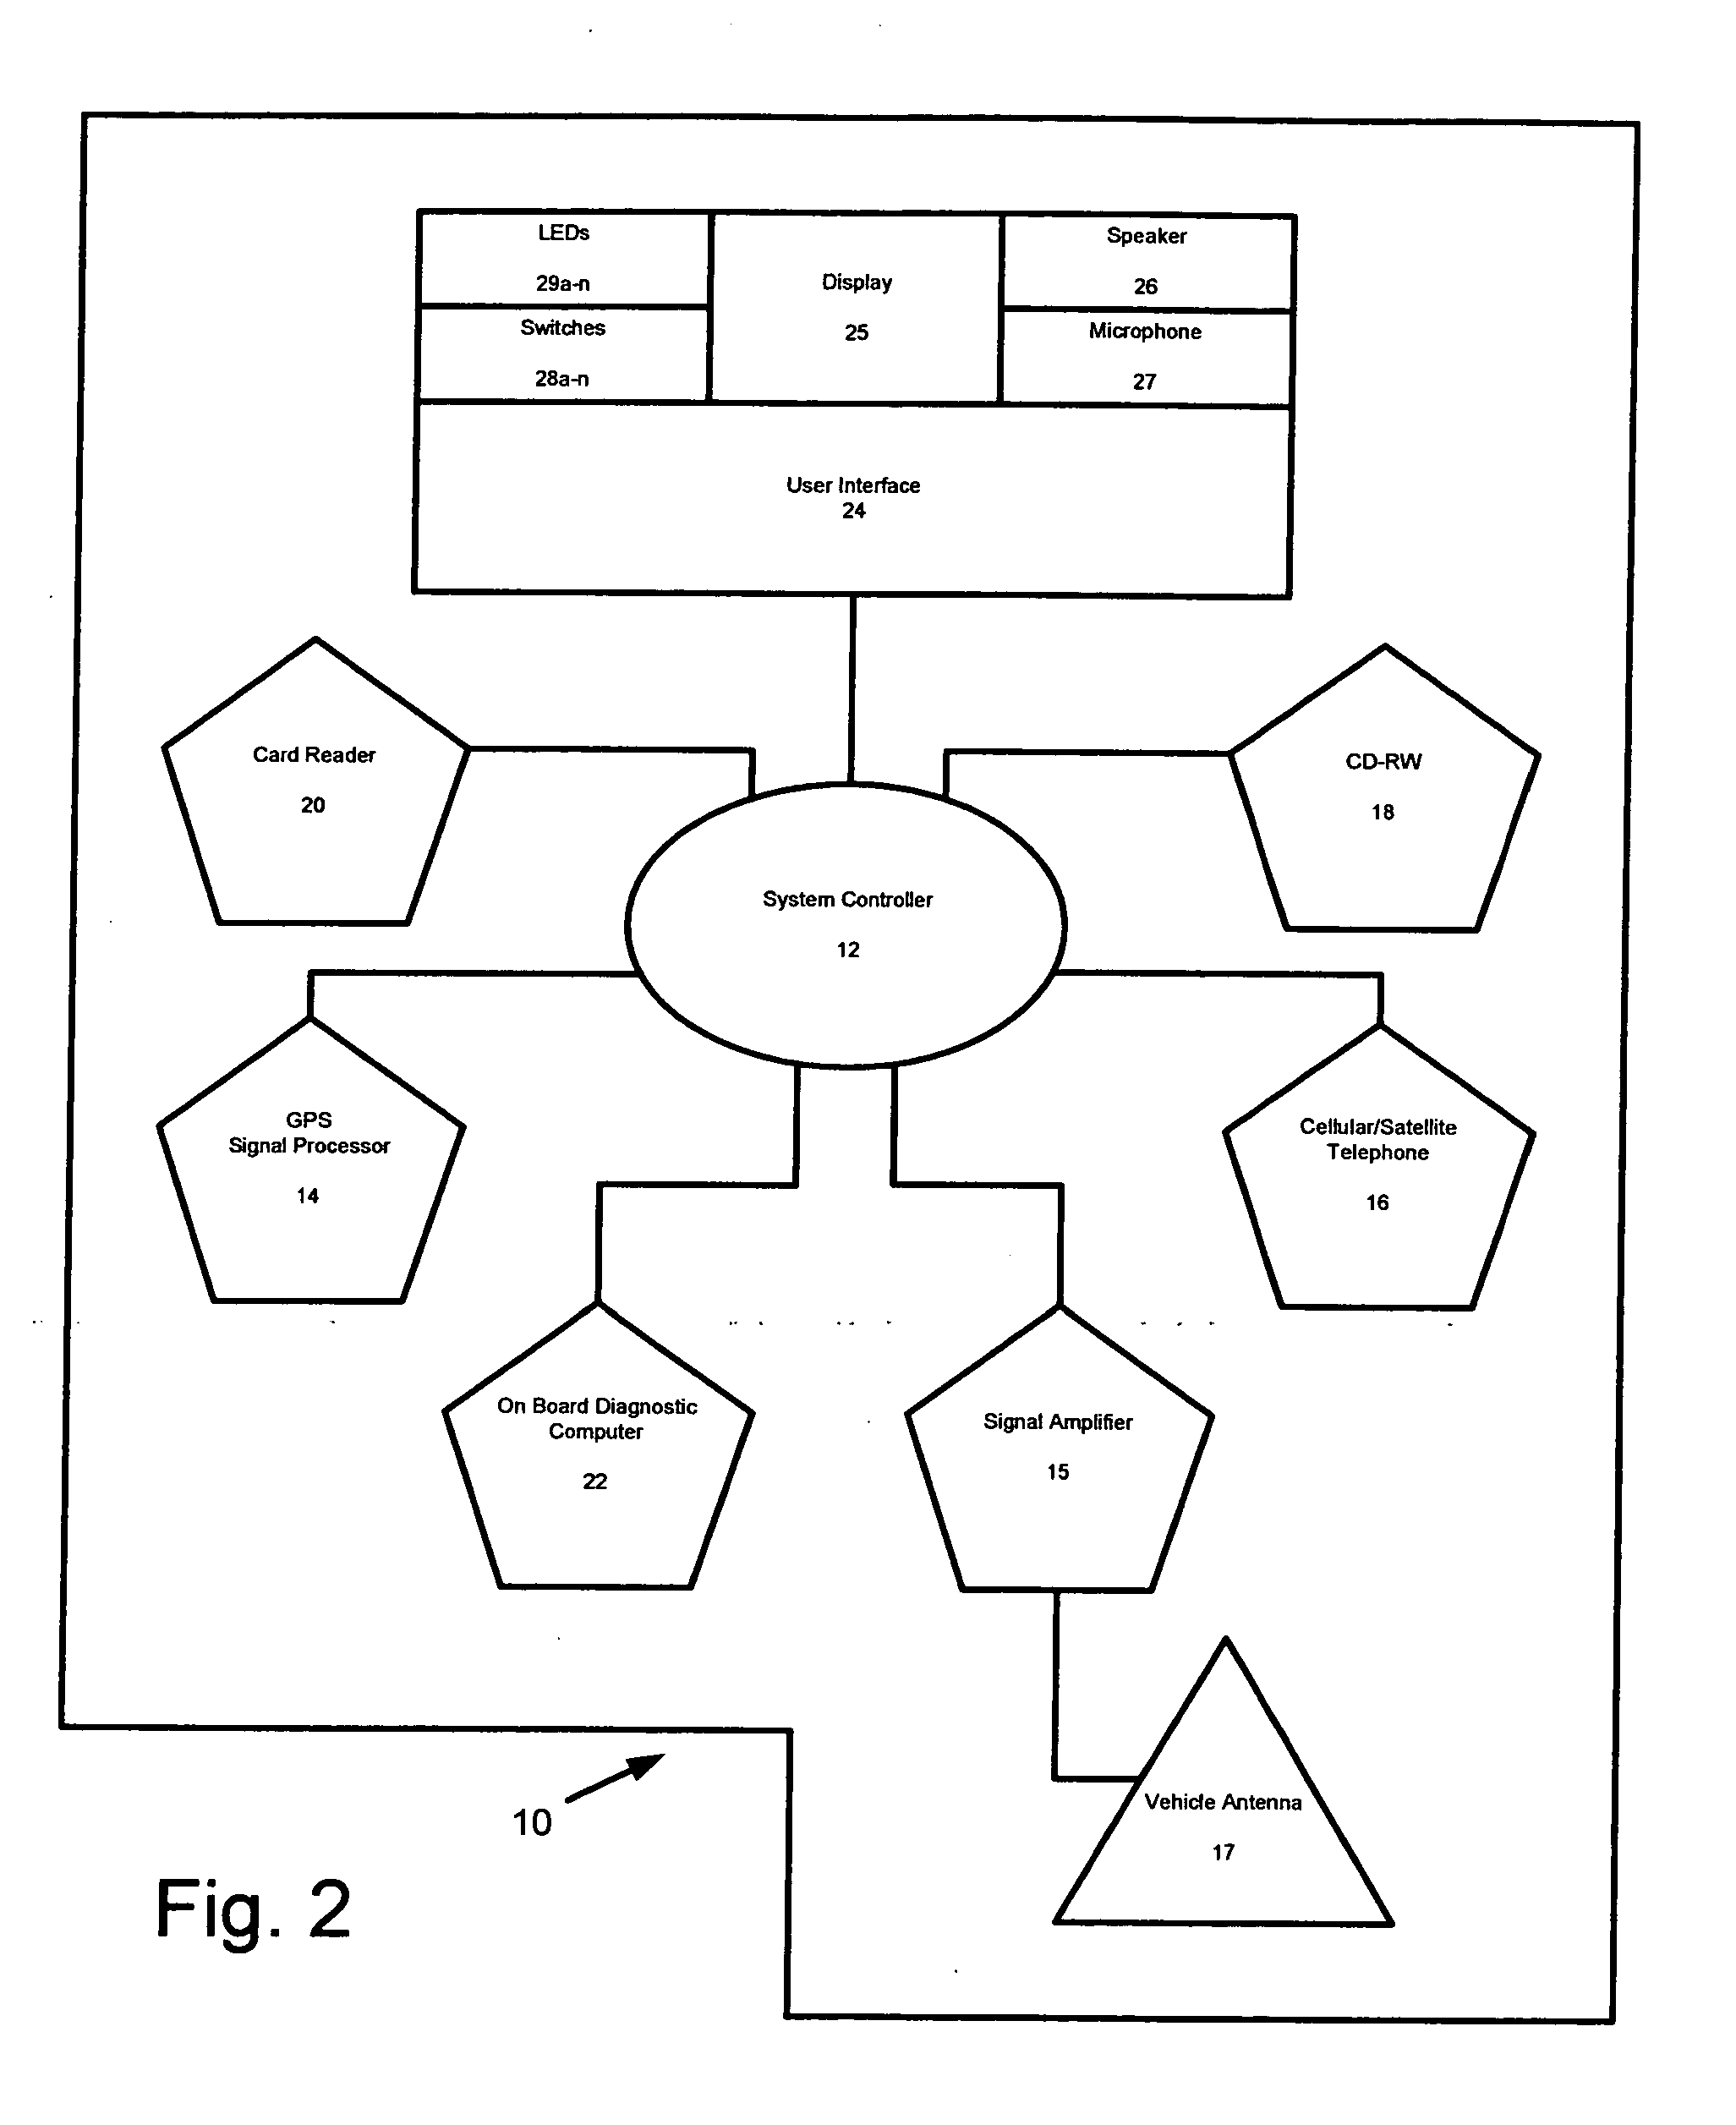 System for safe and effective communication between a vehicle and a telecommunication center